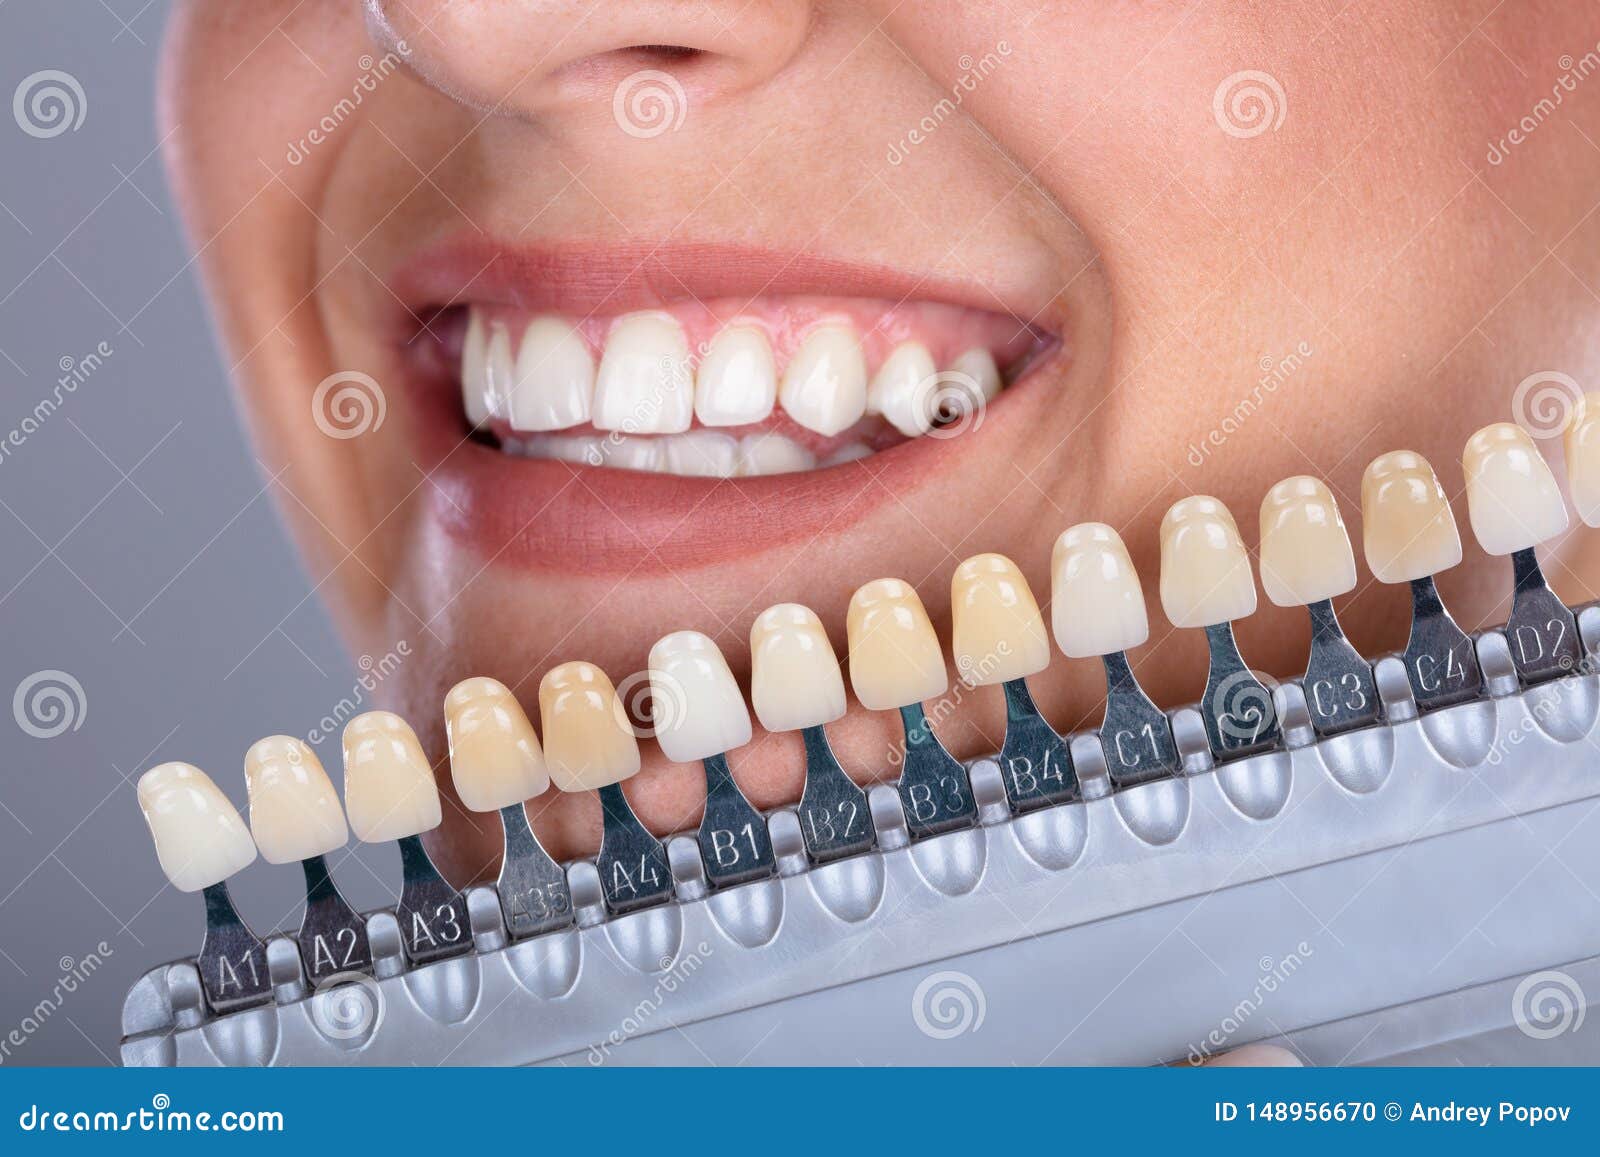 woman matching shade of the implant teeth